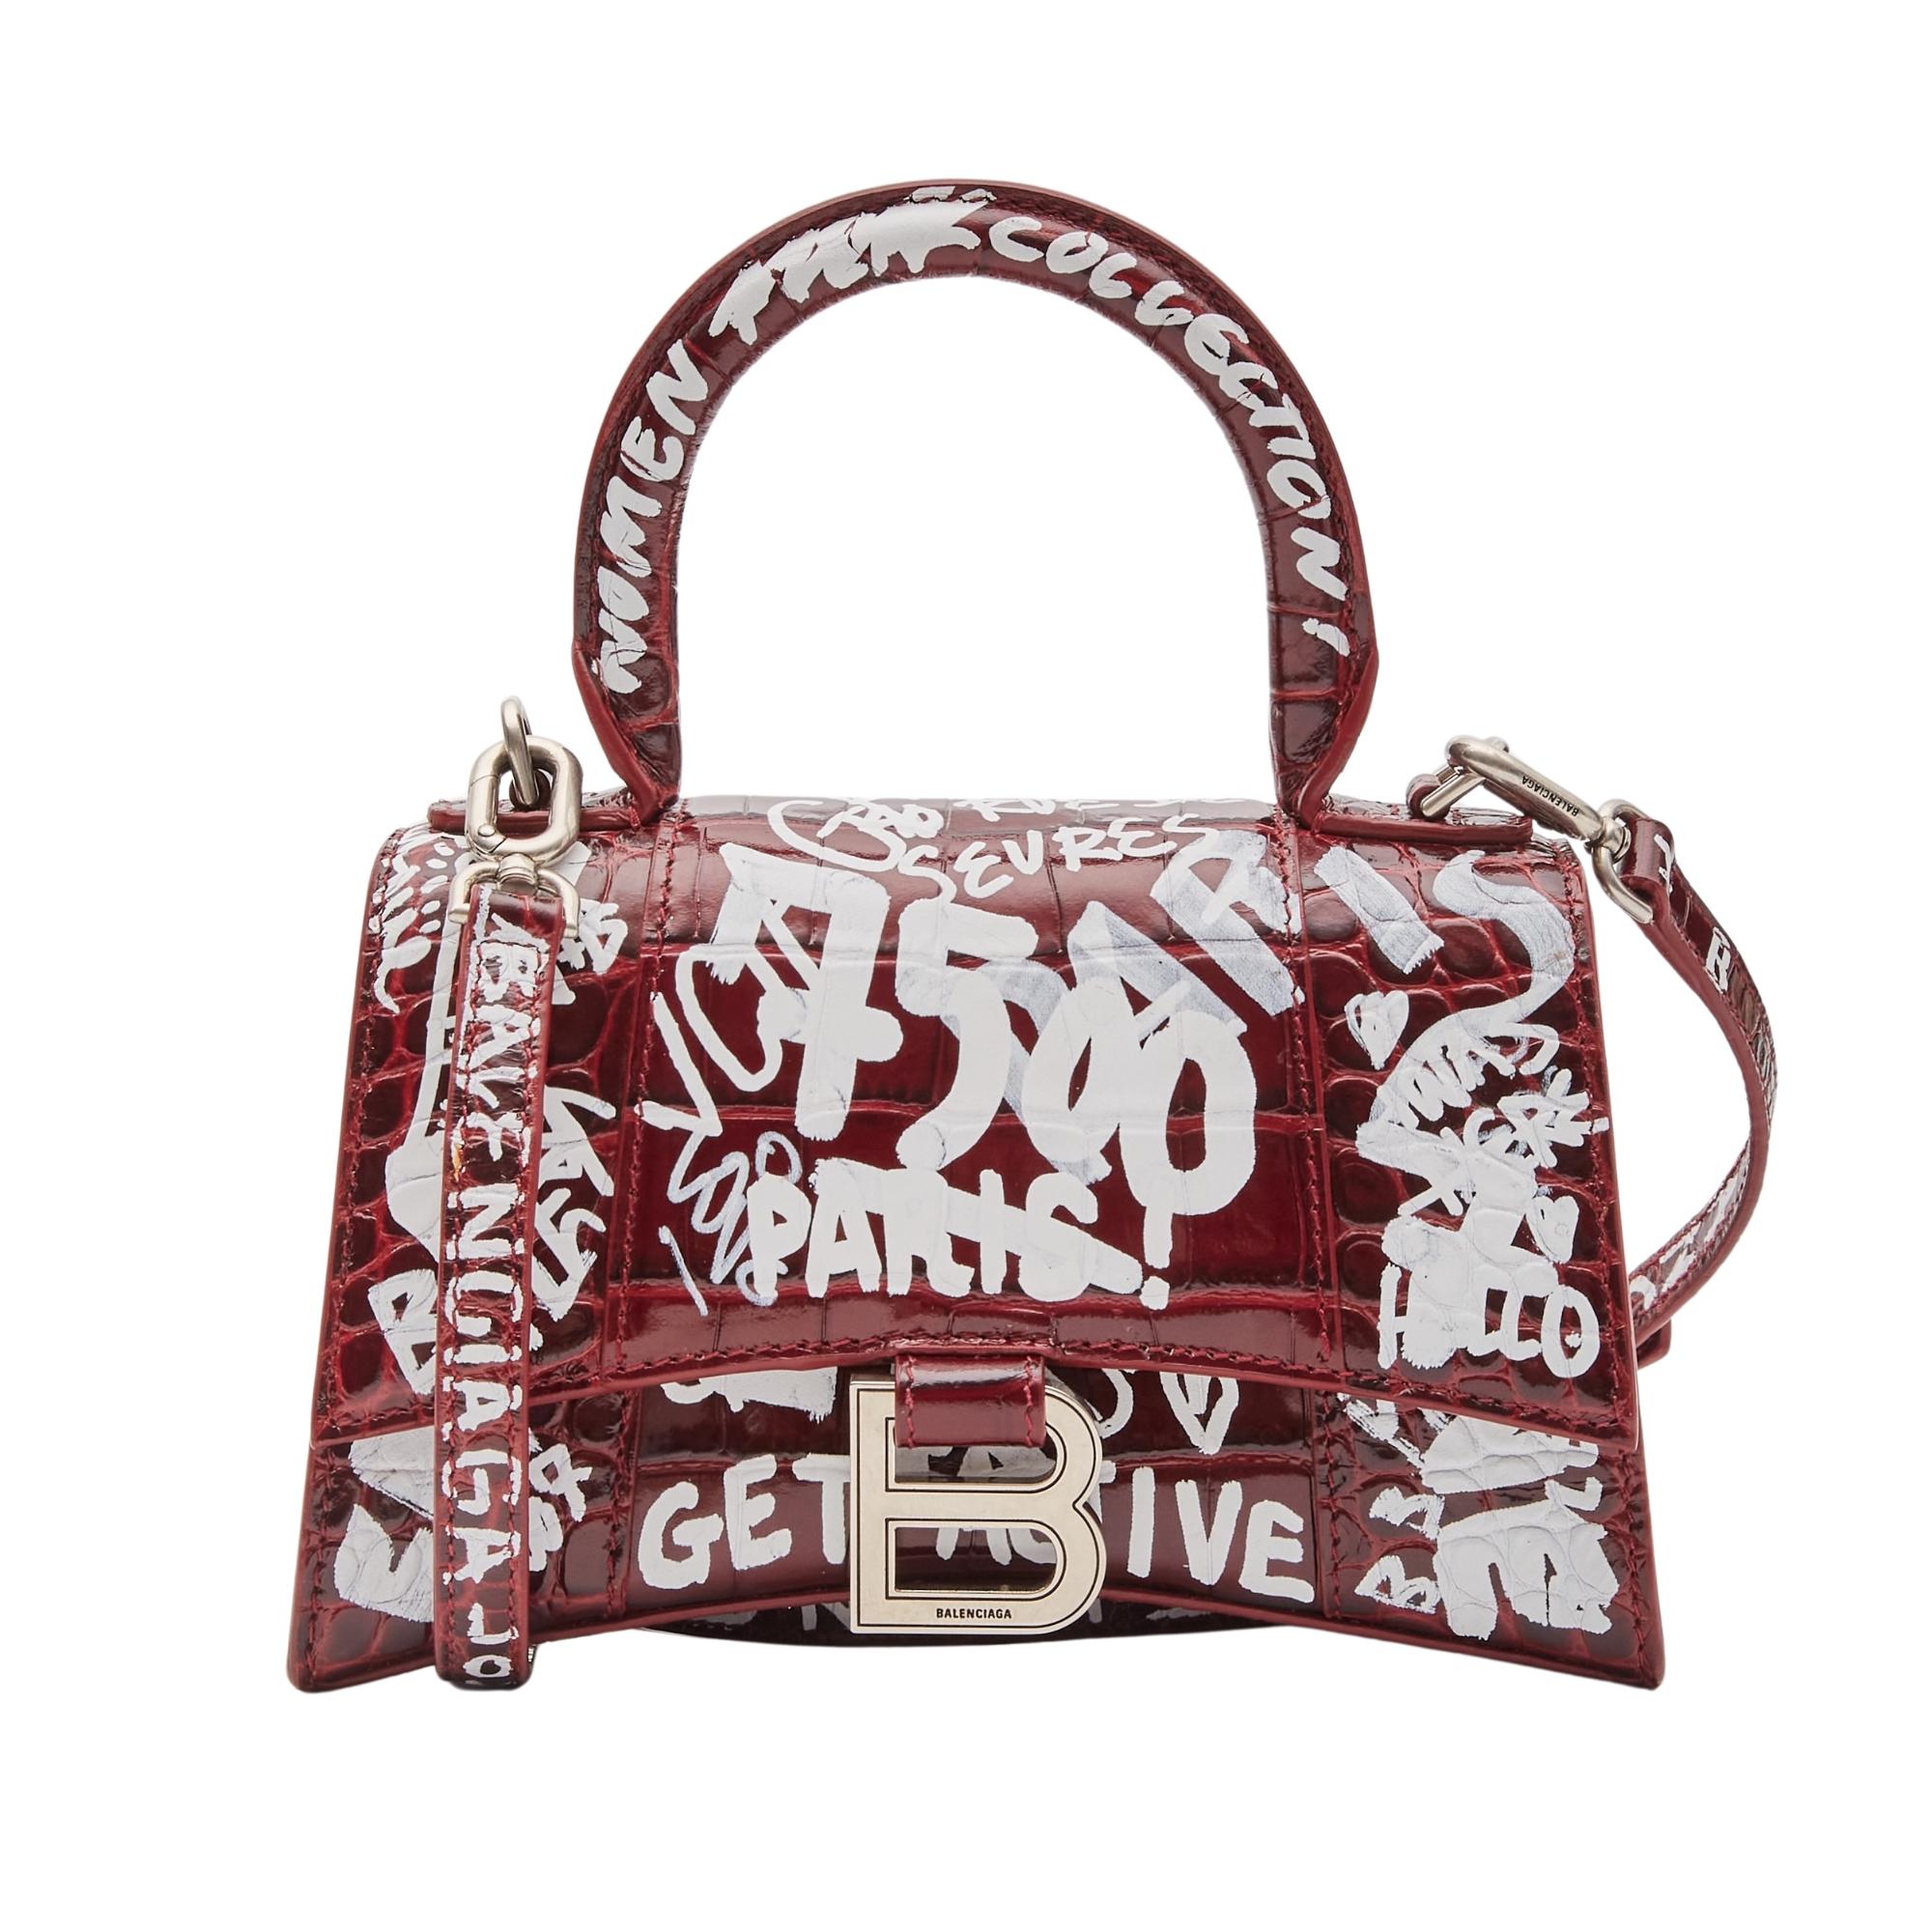 This handbag is made of crocodile embossed burgundy calfskin leather with a white graffiti print overlay. The bag features a sturdy leather top handle with silver links, a prominent b logo on the front flap, and an optional, adjustable shoulder